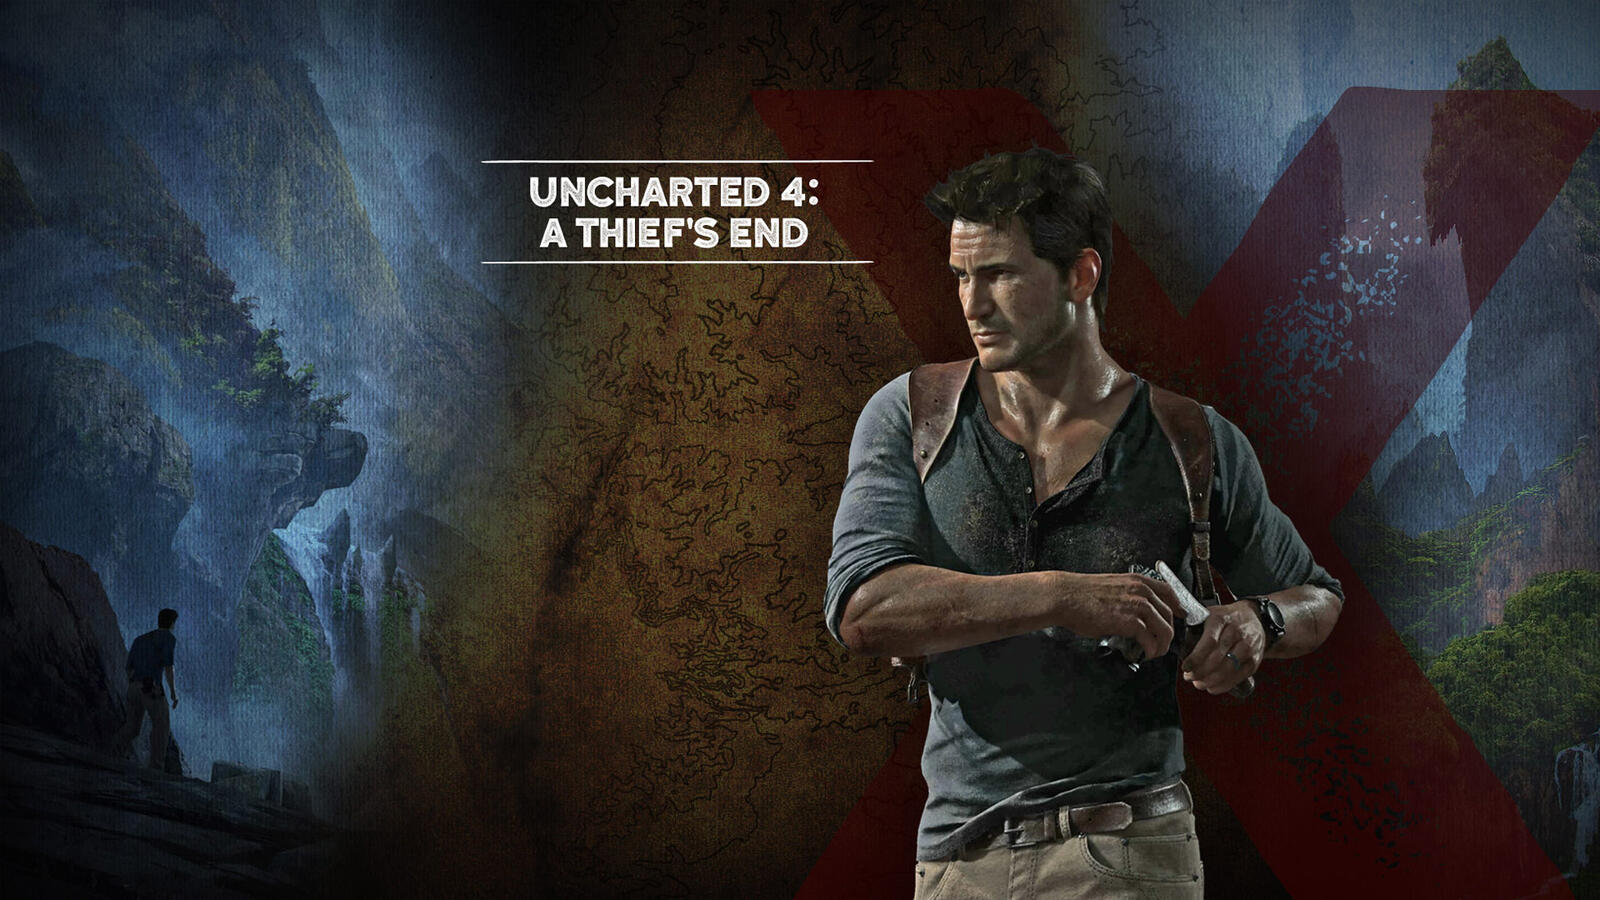 Wallpapers uncharted 4 games Xbox games on the desktop